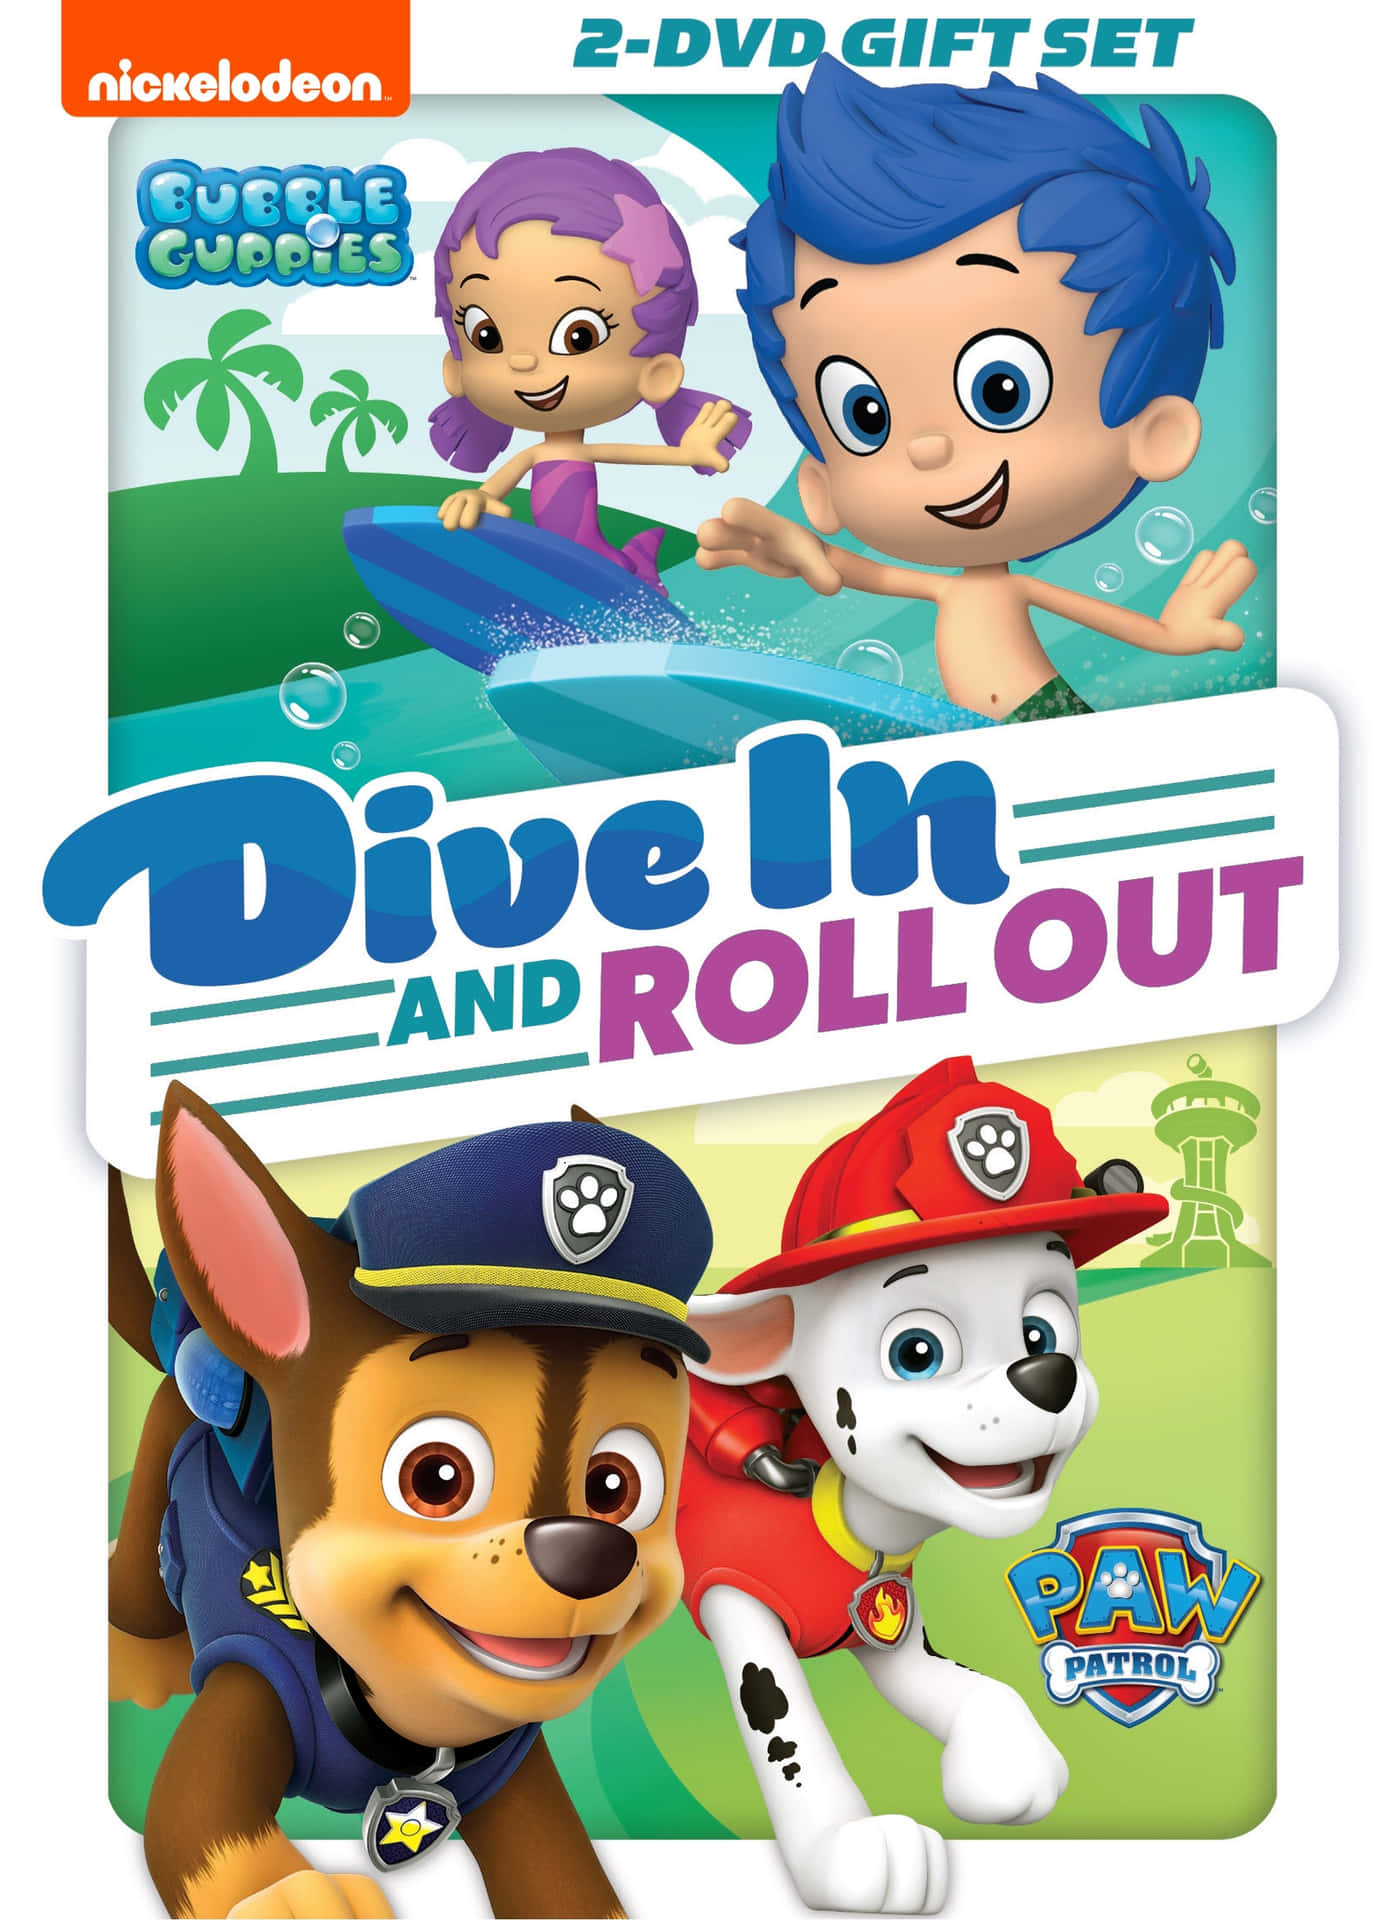 'Join Gil, Molly, and their friends in a magical journey of discovery with Bubble Guppies!'